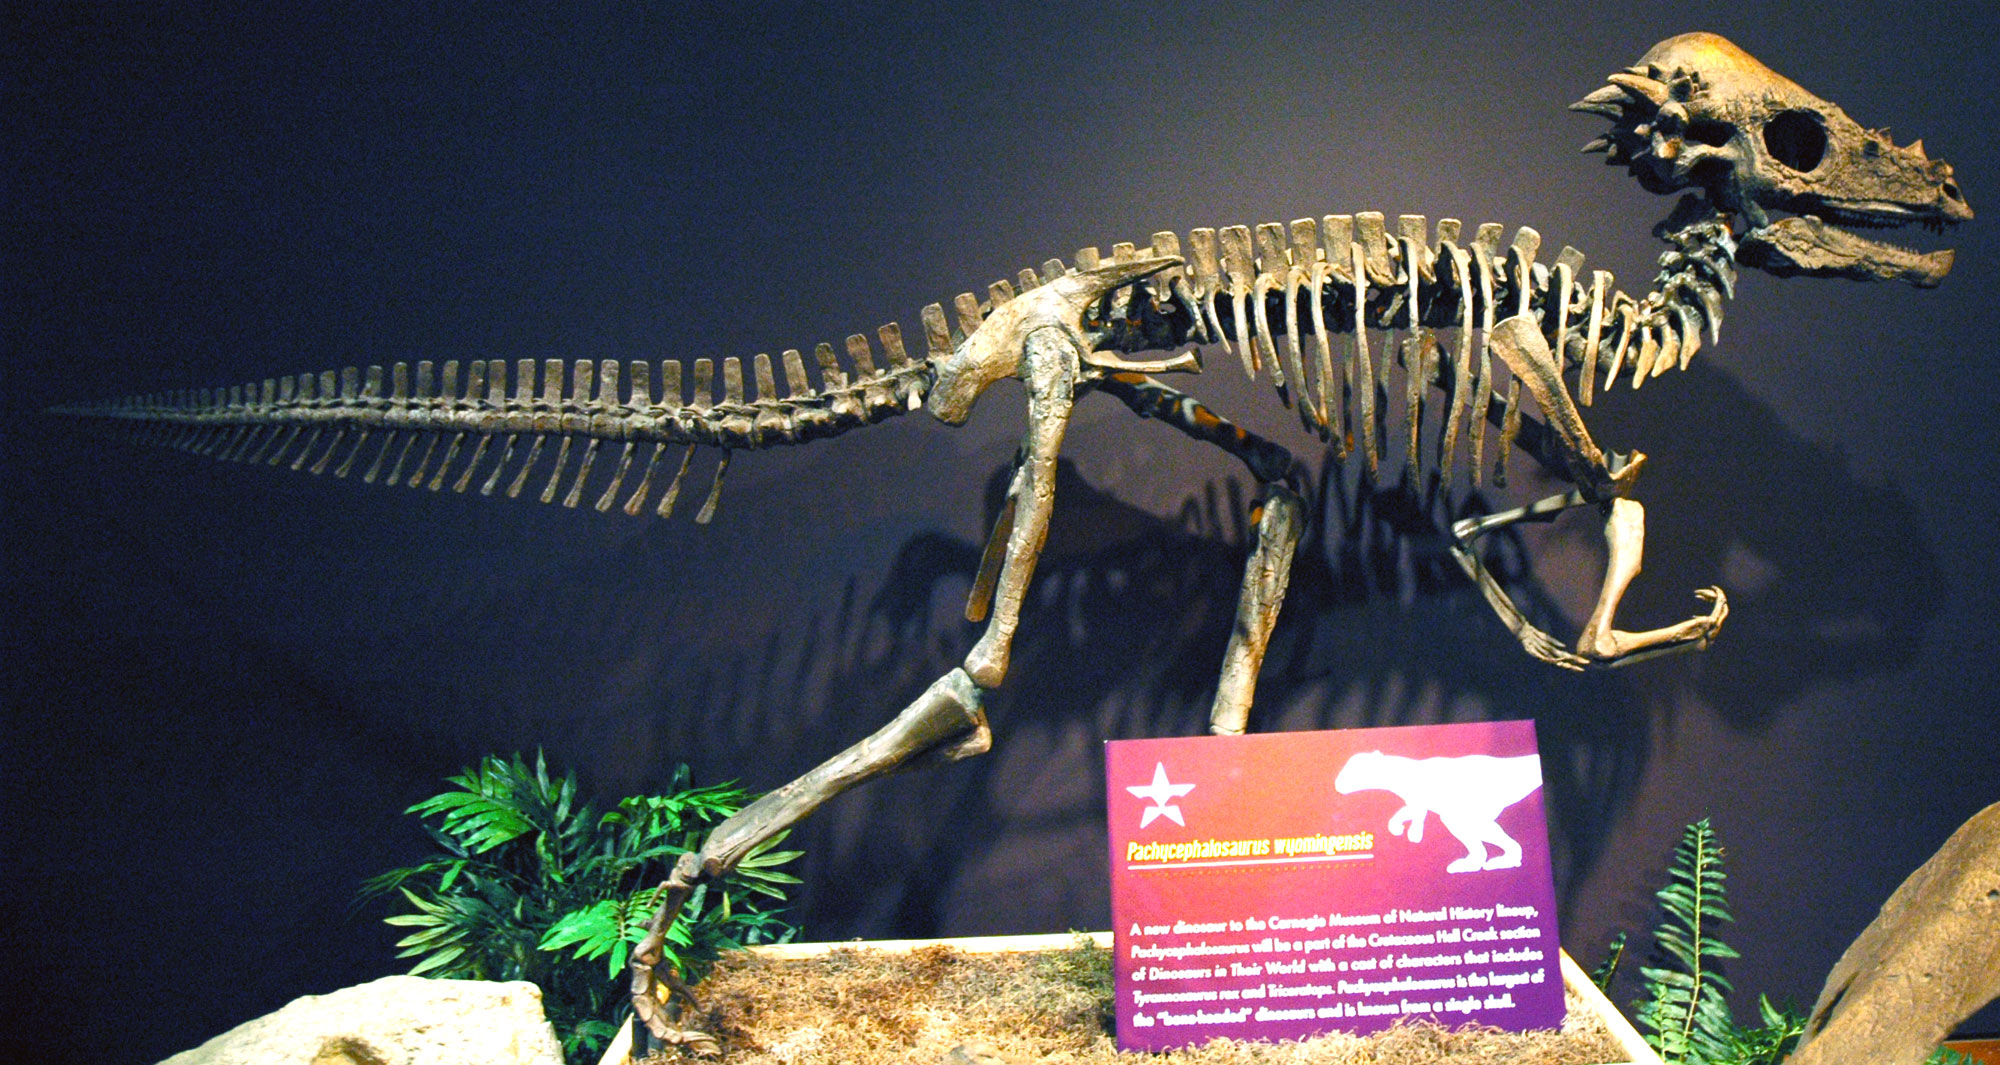 Photograph of a Pachycephalosaurus skeleton from the Cretaceous of Montana on display in a museum. The skeleton is mounted so that the animal is walking on two long hind legs, with the shorter forelegs held off the ground. The spine is nearly horizontal to the ground with the long tail extended and not touching the ground. The head is held up. The skull is thick with large spikes at the back, extending to a narrow point in the front. The eye socket is large.